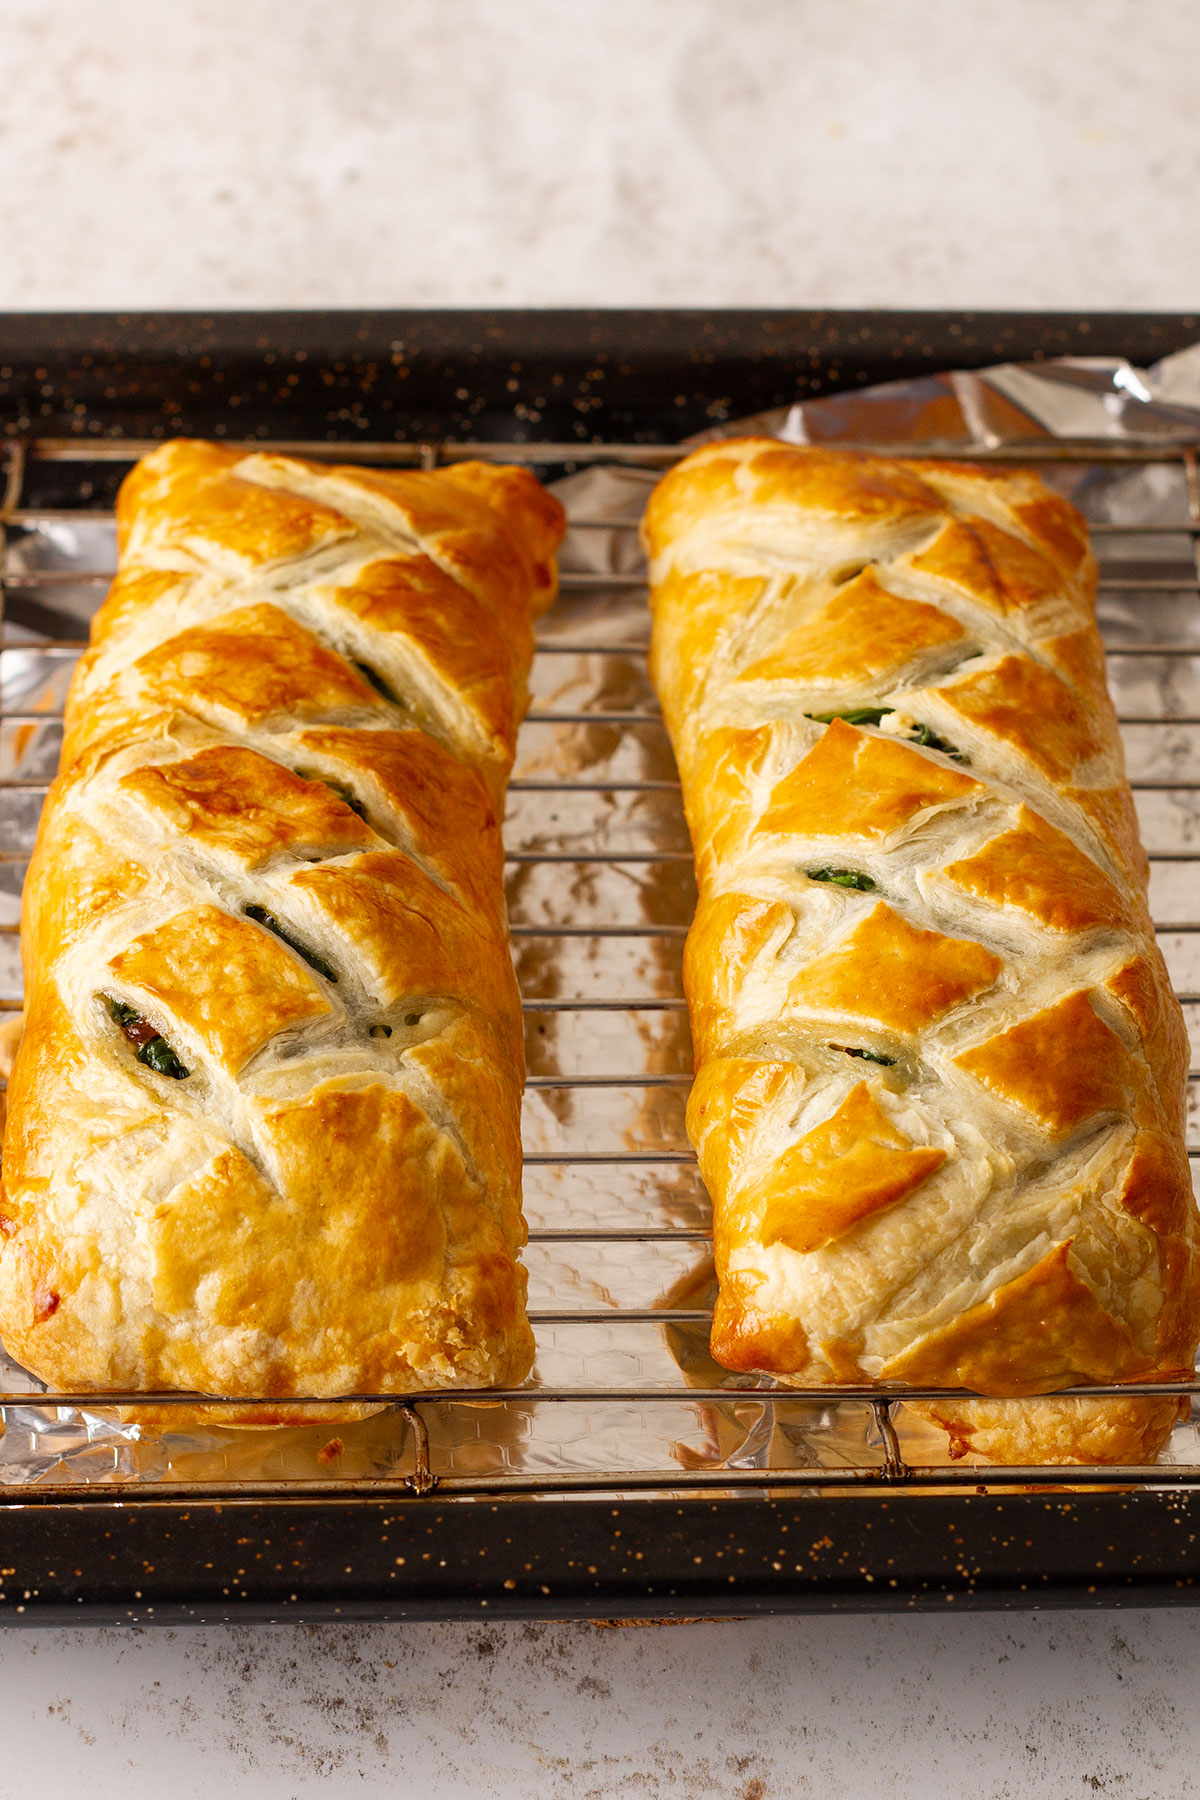 Two baked salmon wellingtons ready for serving.